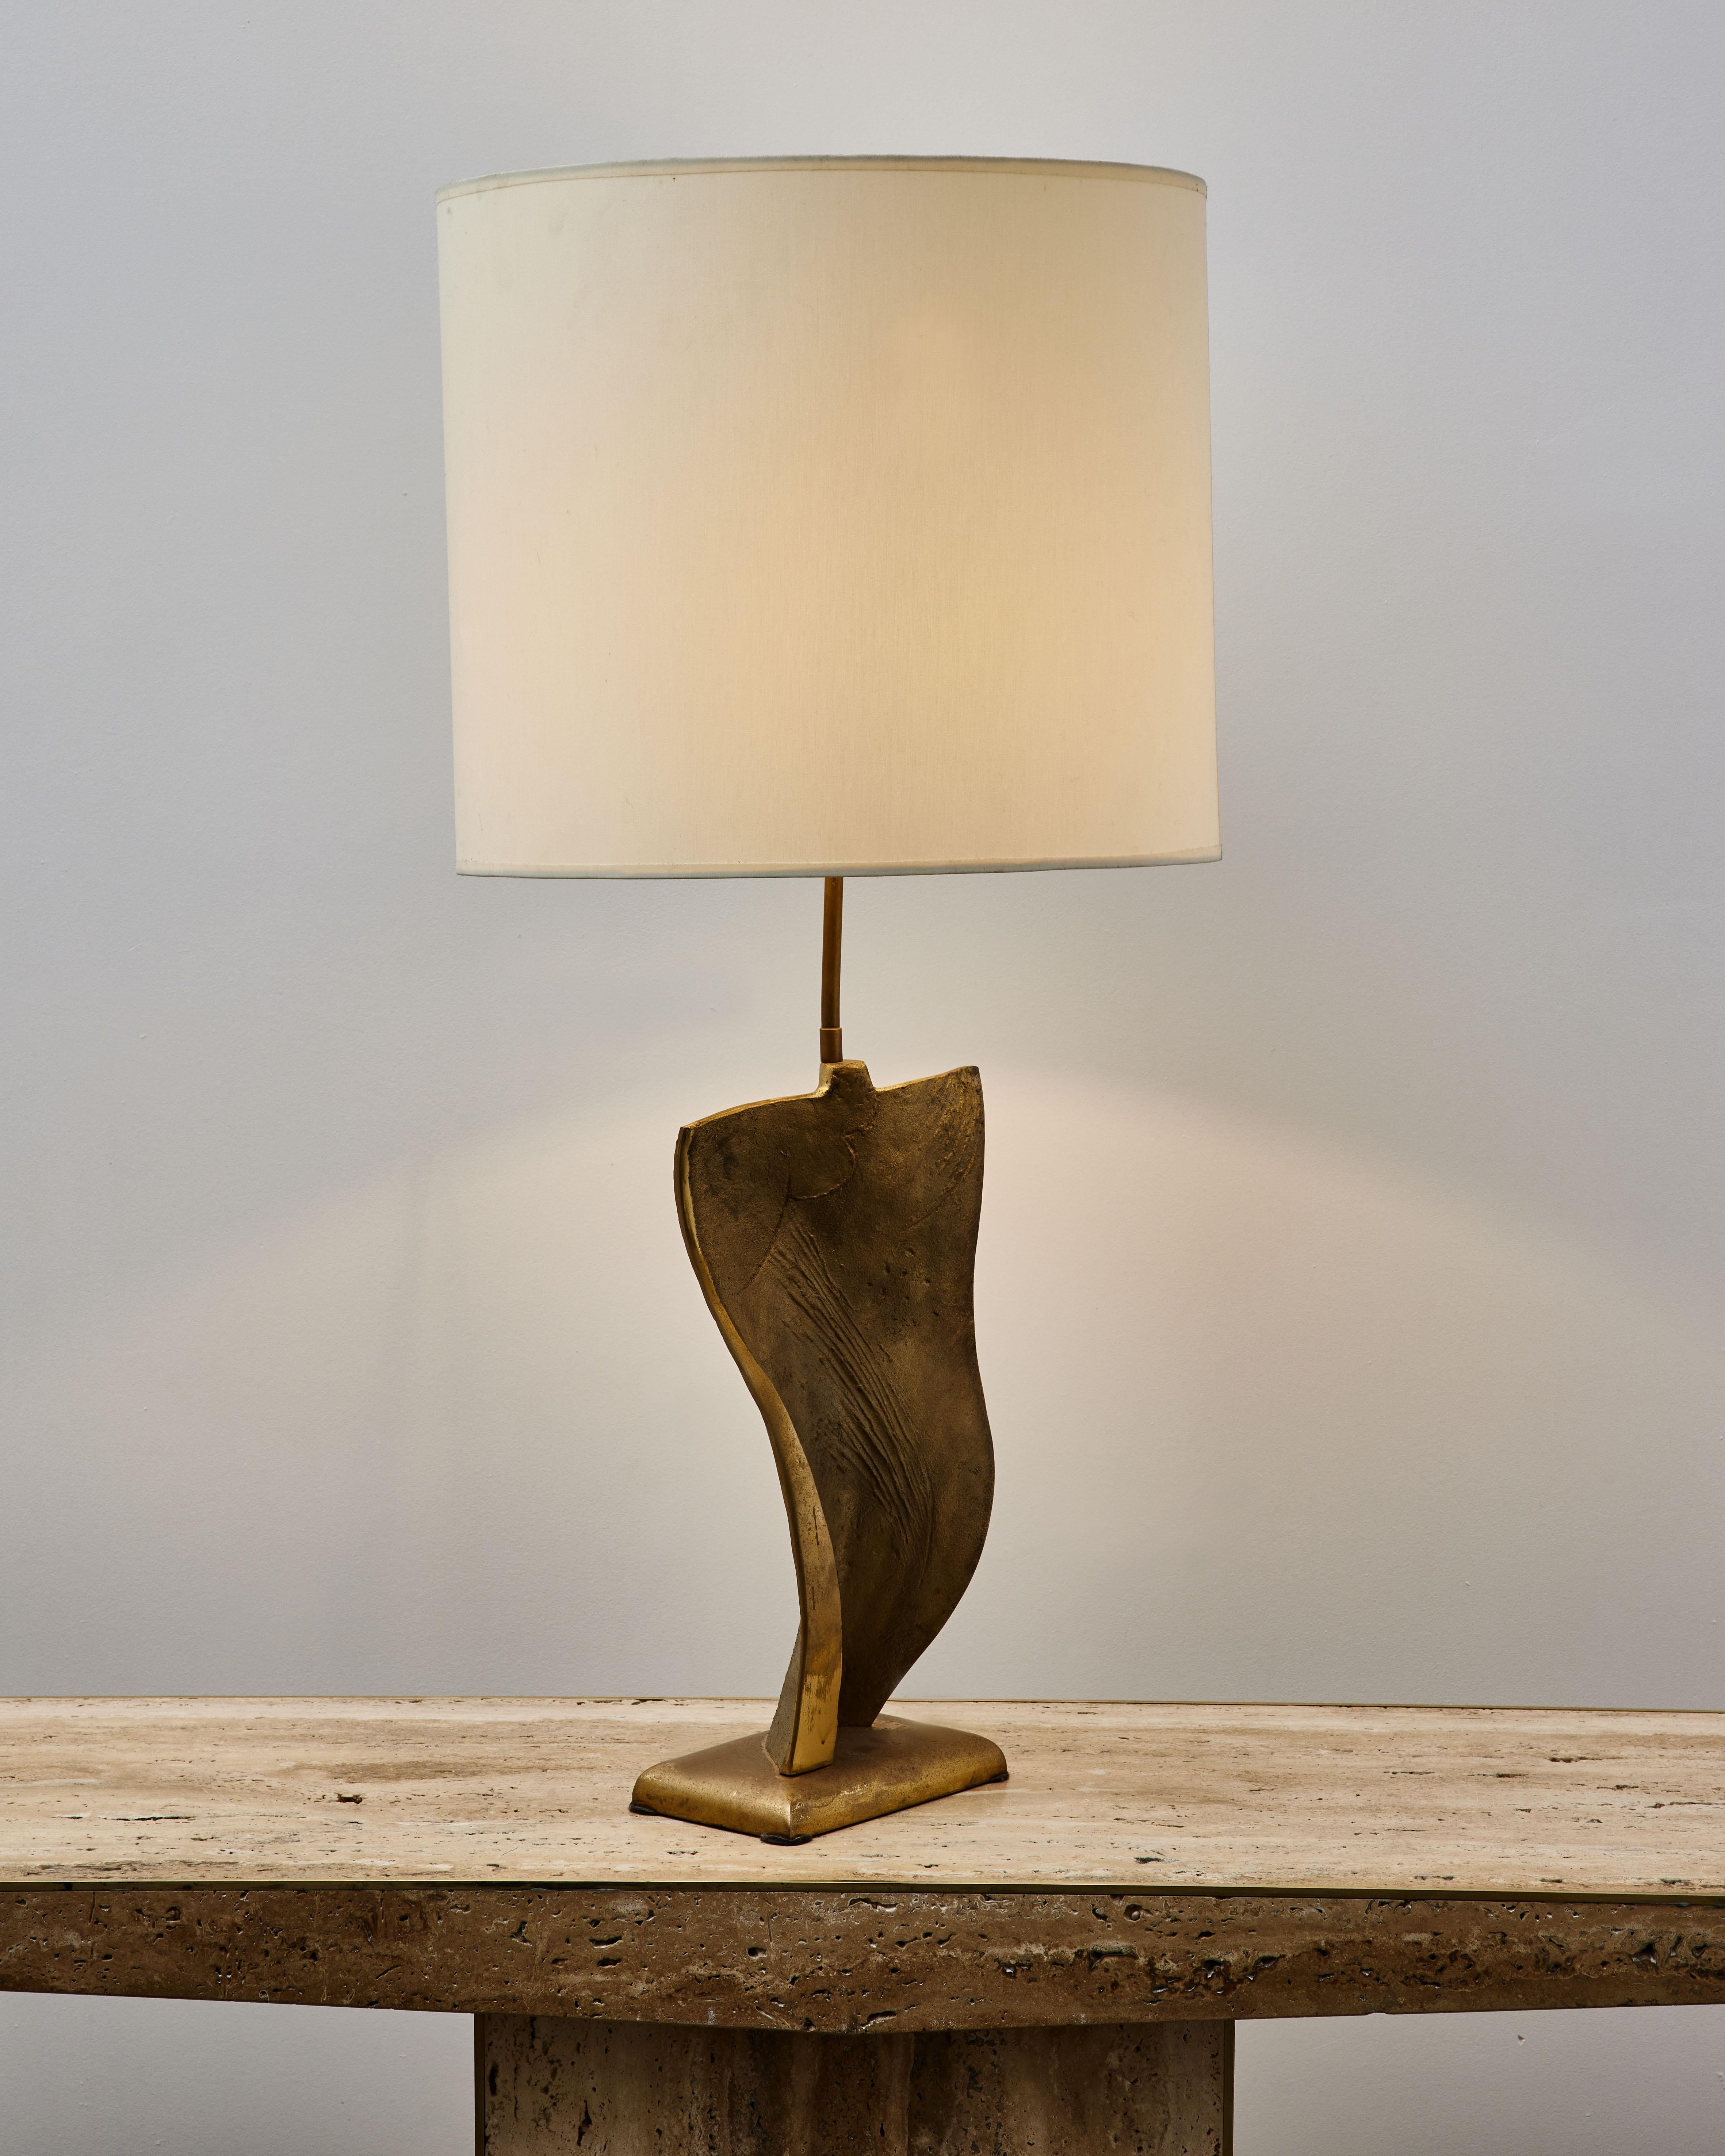 Unique table lamp in sculpted bronze.
France, 1970s.

Rewired and restored.
Price and dimensions without shade.